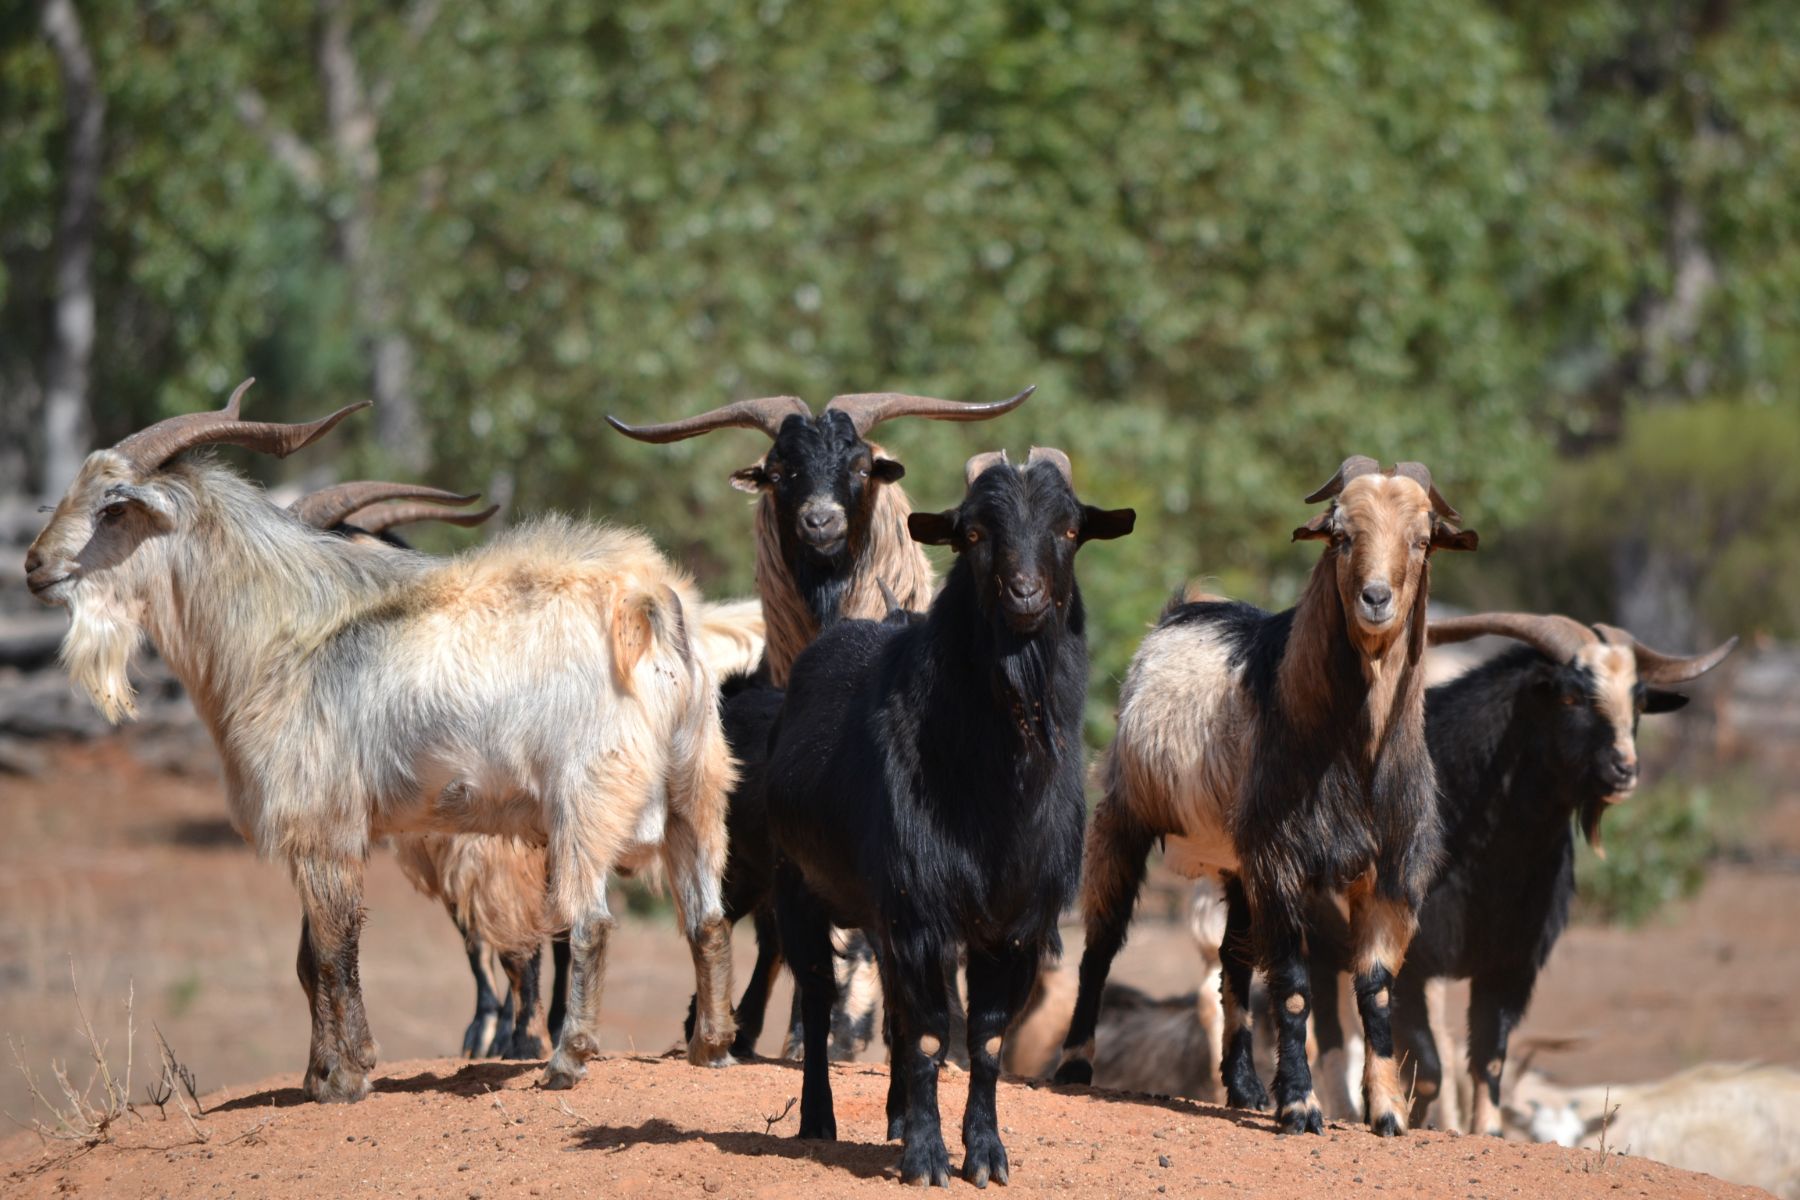 Herd of goats standing on dirt mound, three with black coats, two with lighter coats